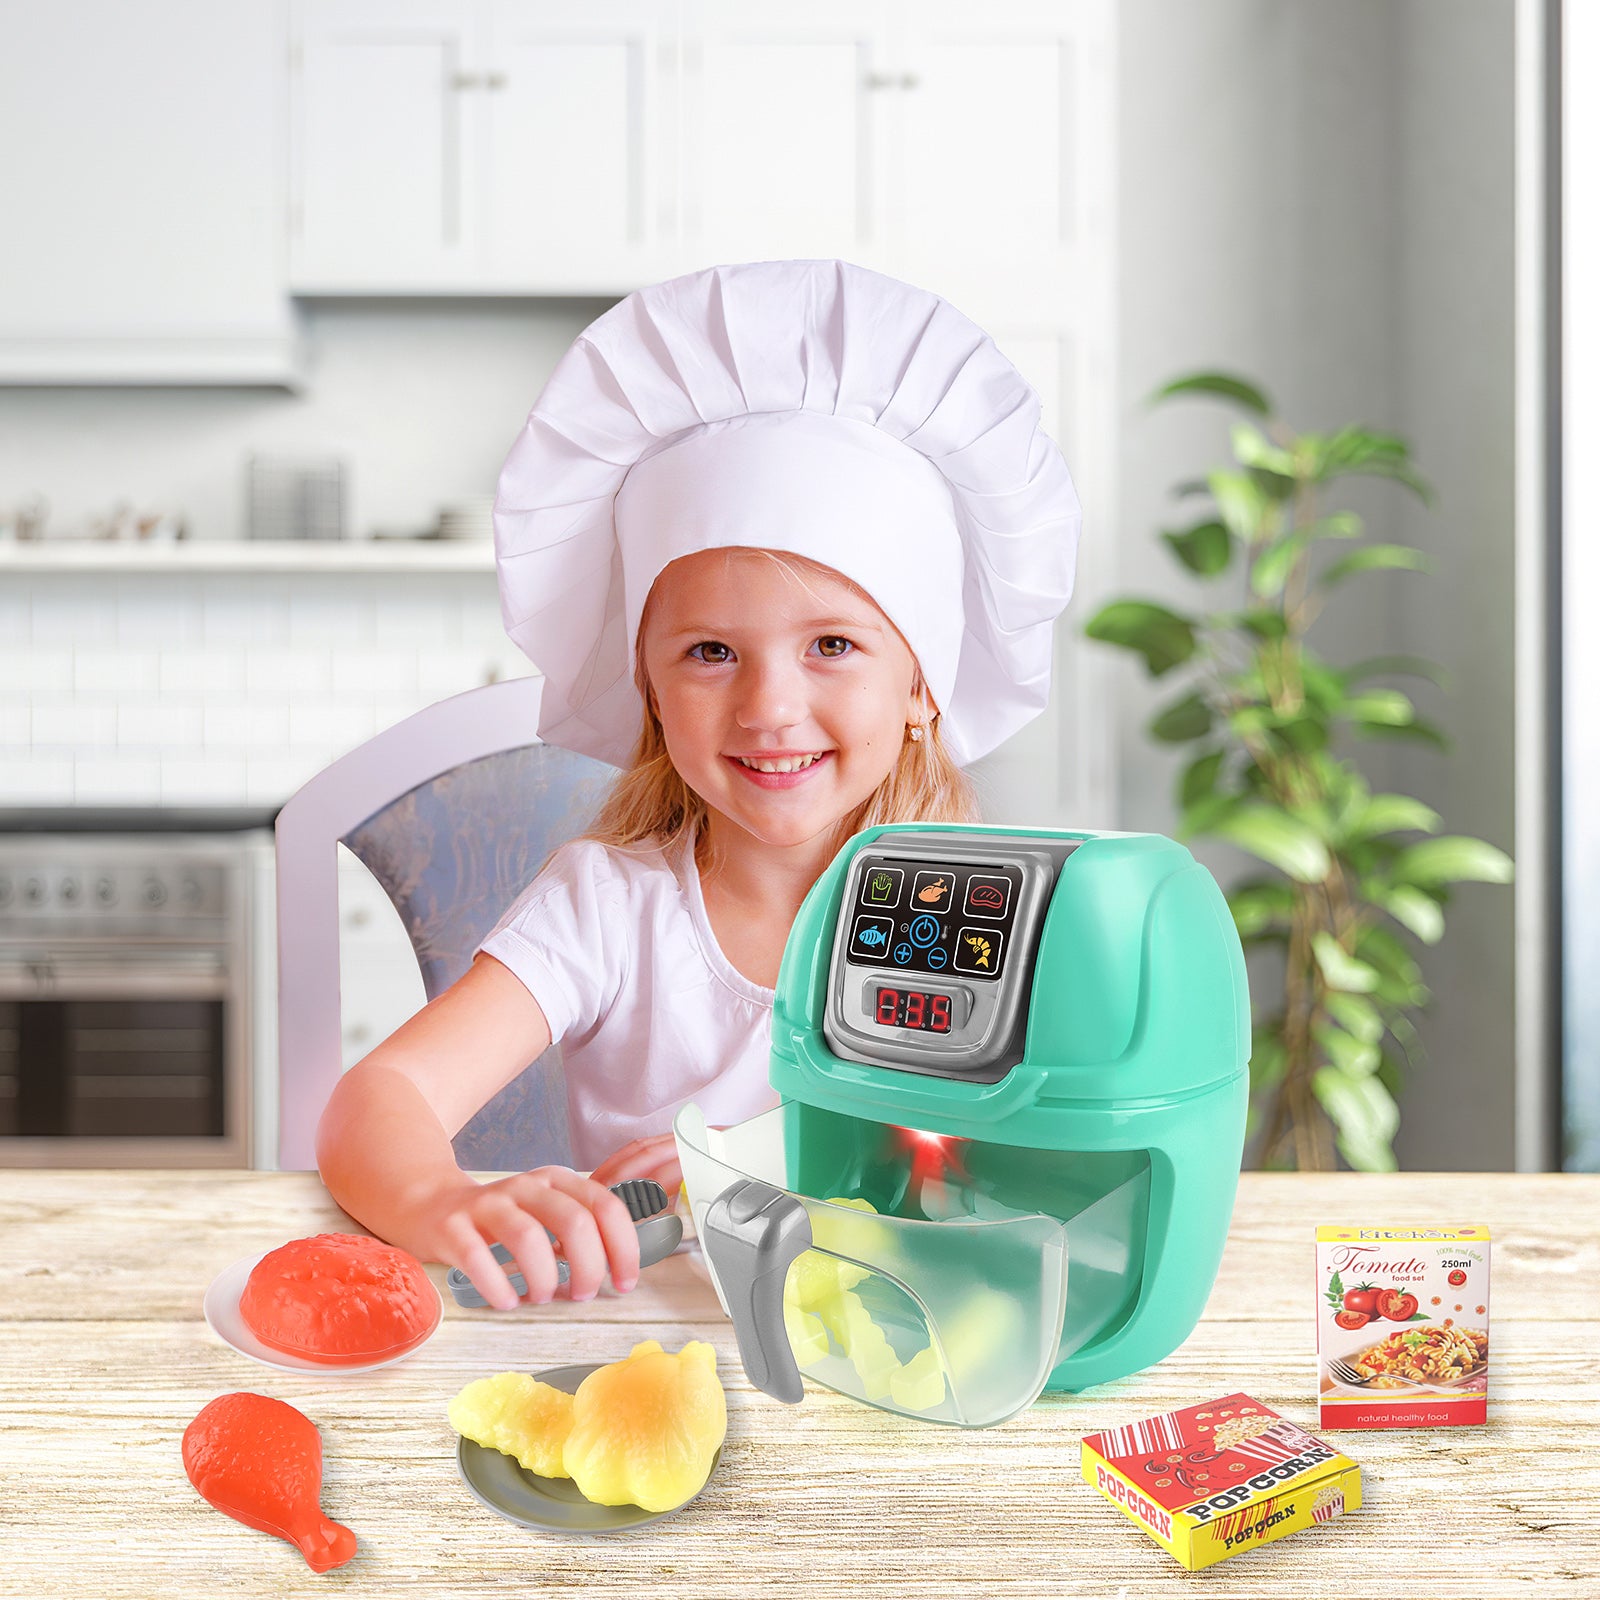 Kids Air Fryer Kitchen Toy Playhouse Role-Play Food Cooking Toy